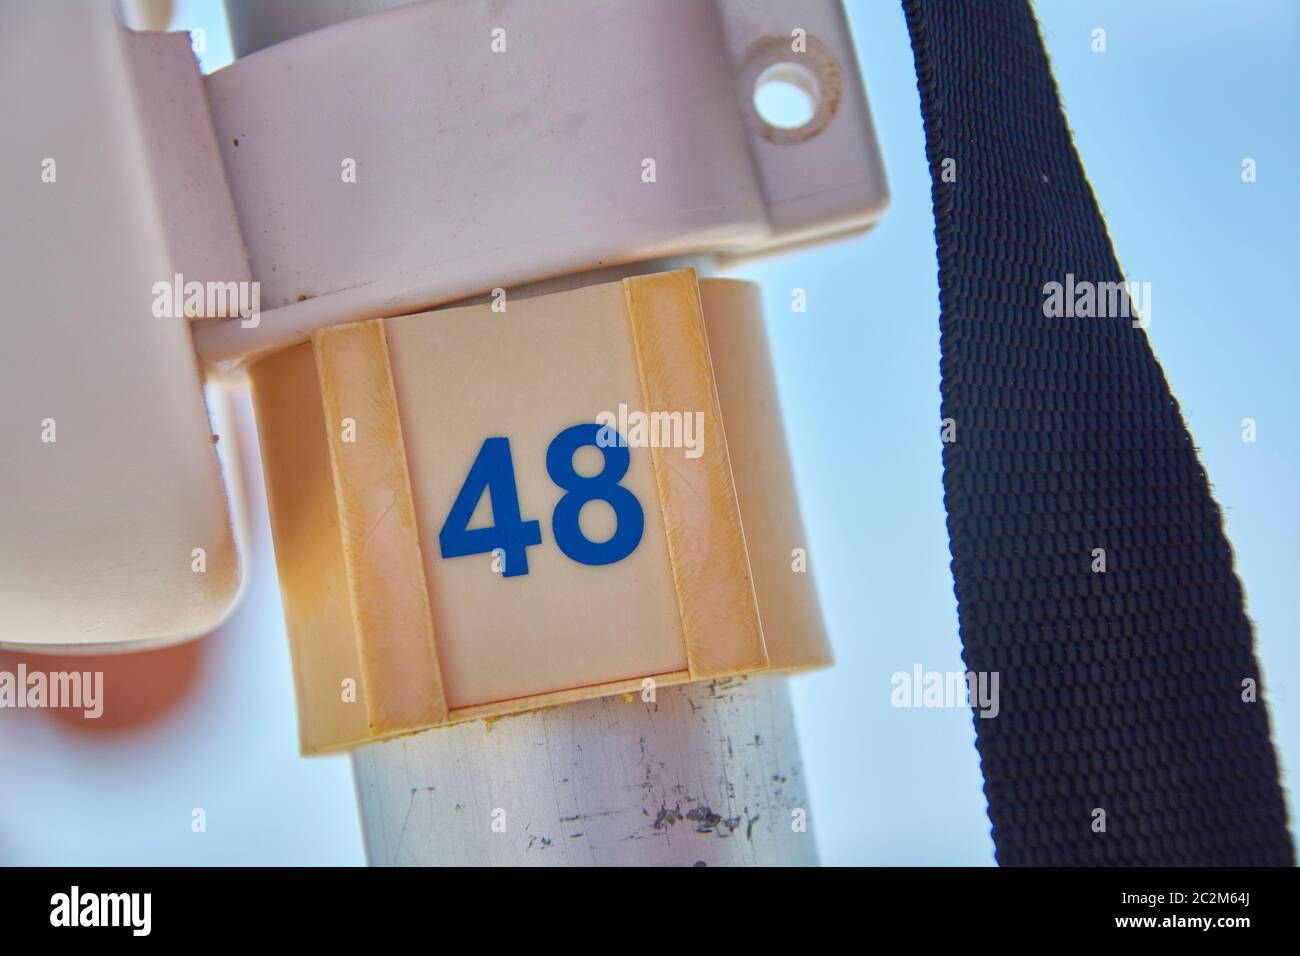 Numbered ferry with the number 48 used to mark the number of beach umbrellas in the bathhouse. Stock Photo